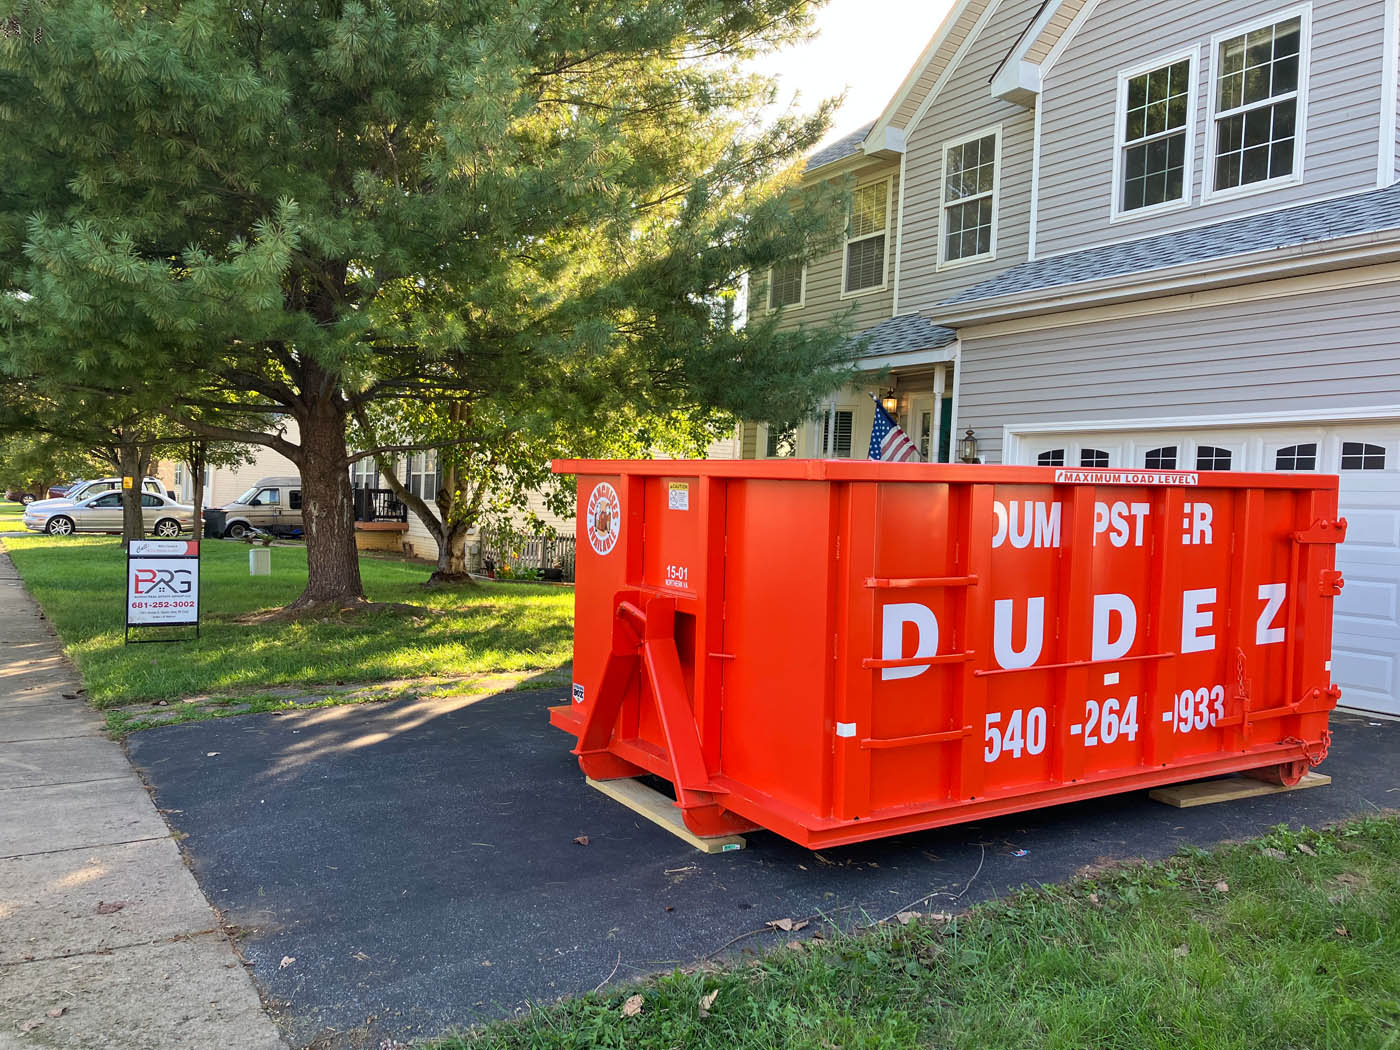 
				Dumpster Dudez parked in front of a residential home, contact us today for Rochester residential dumpster services.
			